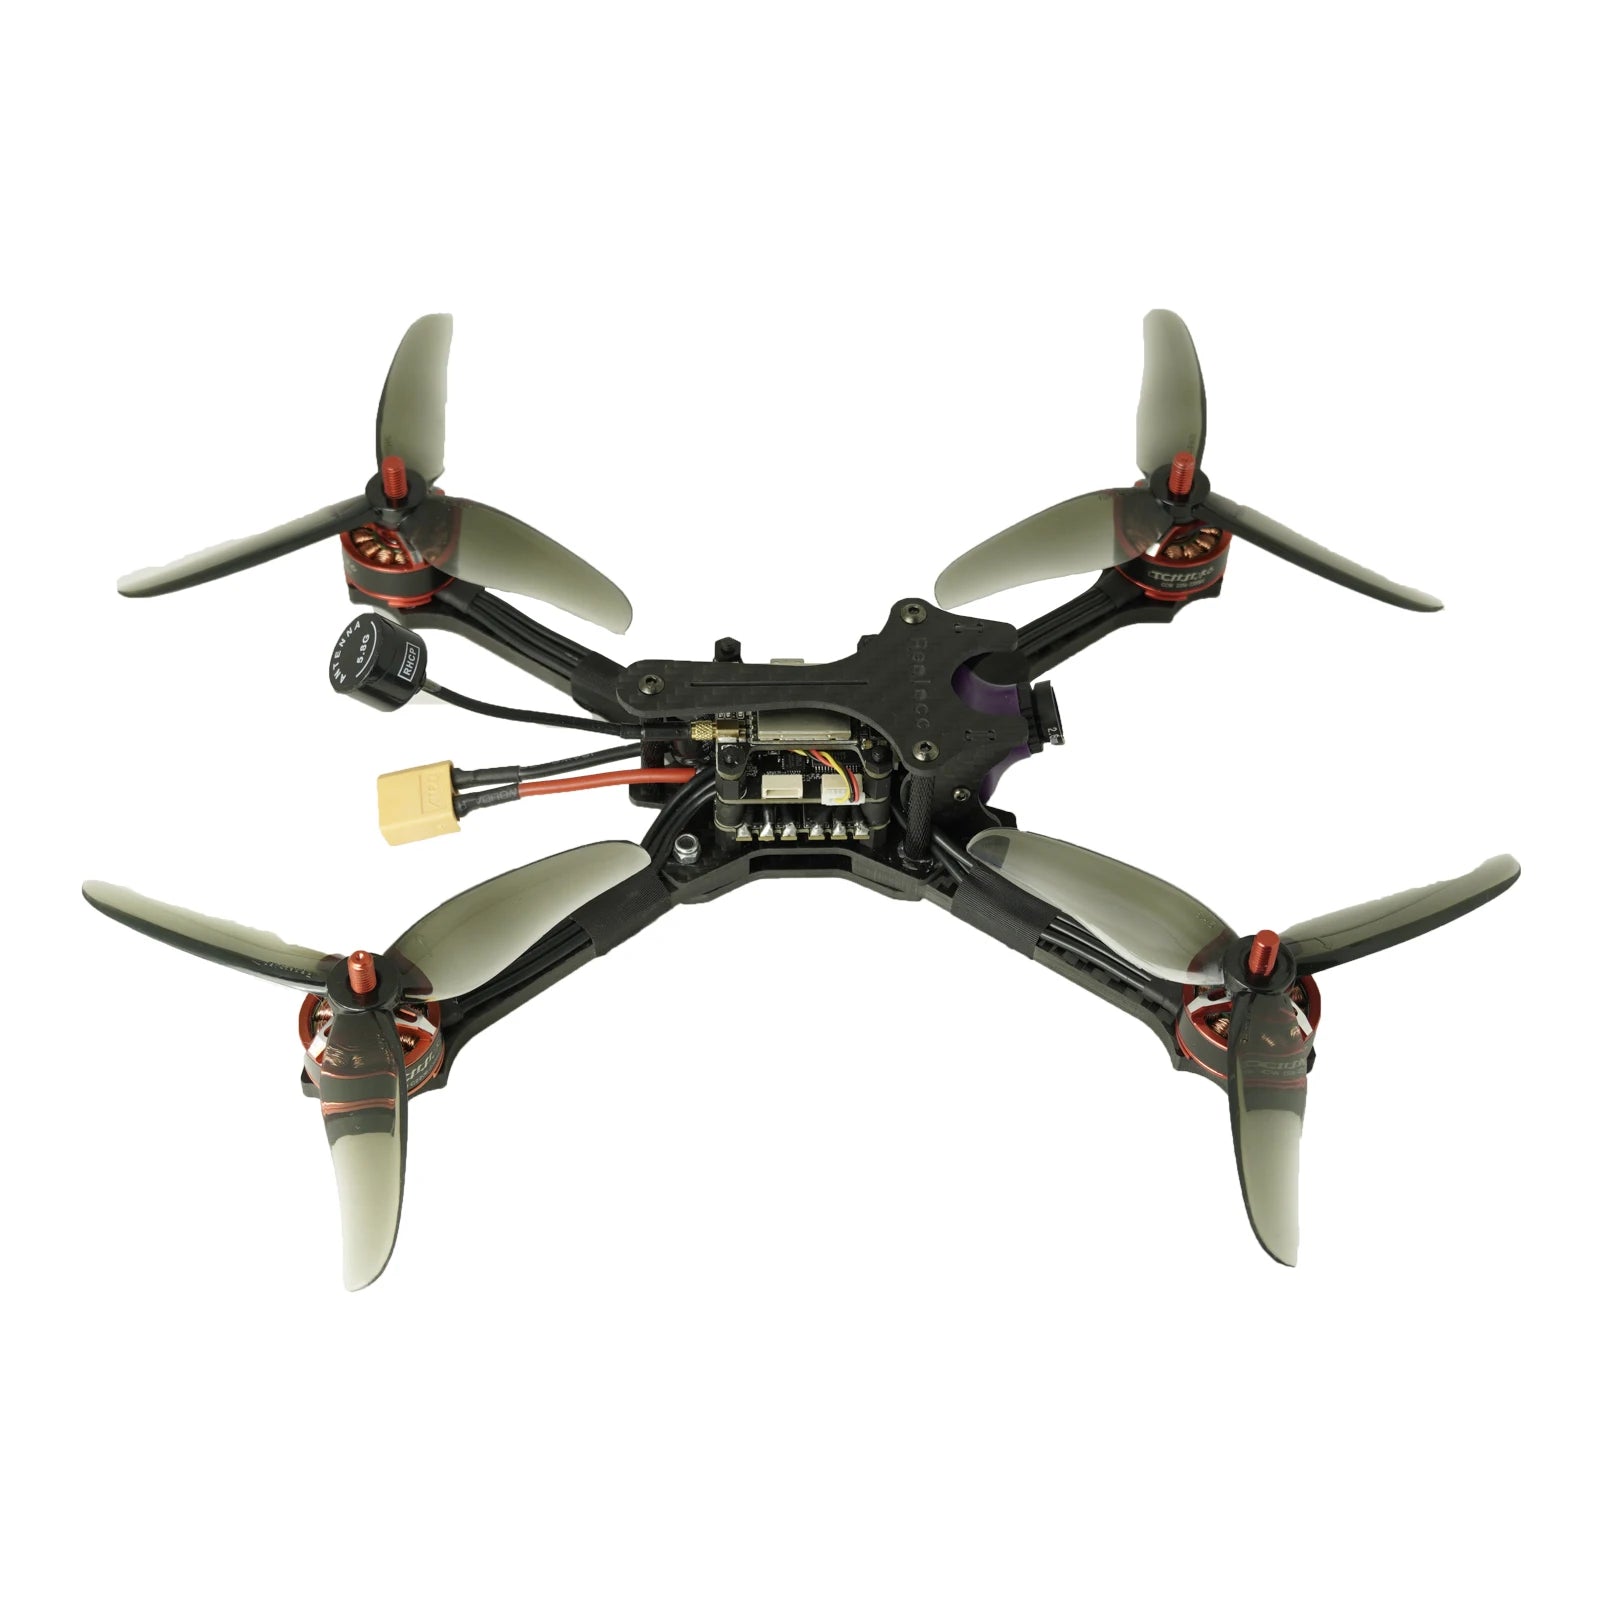 TCMMRC Xtreme 210 Racing Drone, flexibility allows pilots to fine-tune the drone to suit their racing style . this